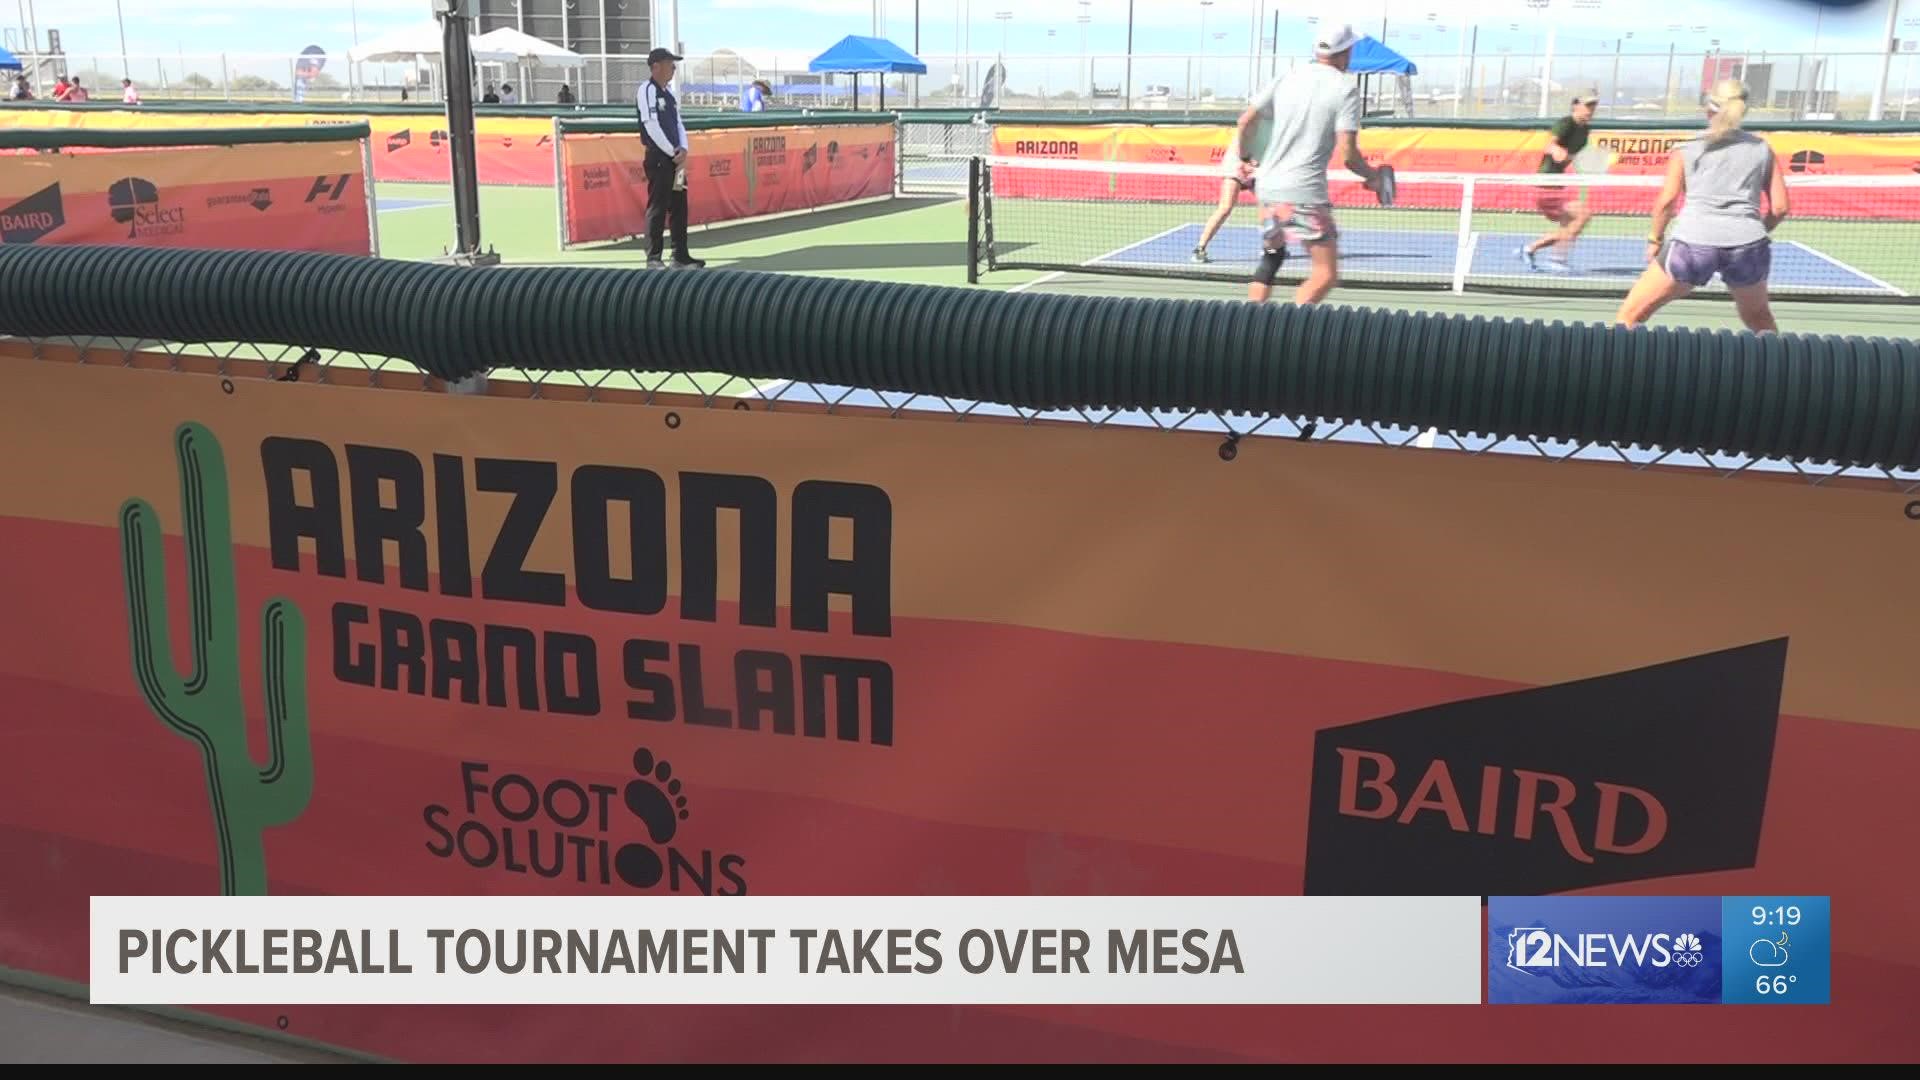 Bell Bank Park in Mesa welcomed the Arizona Grand Slam Professional Pickle Ball Association event this week.